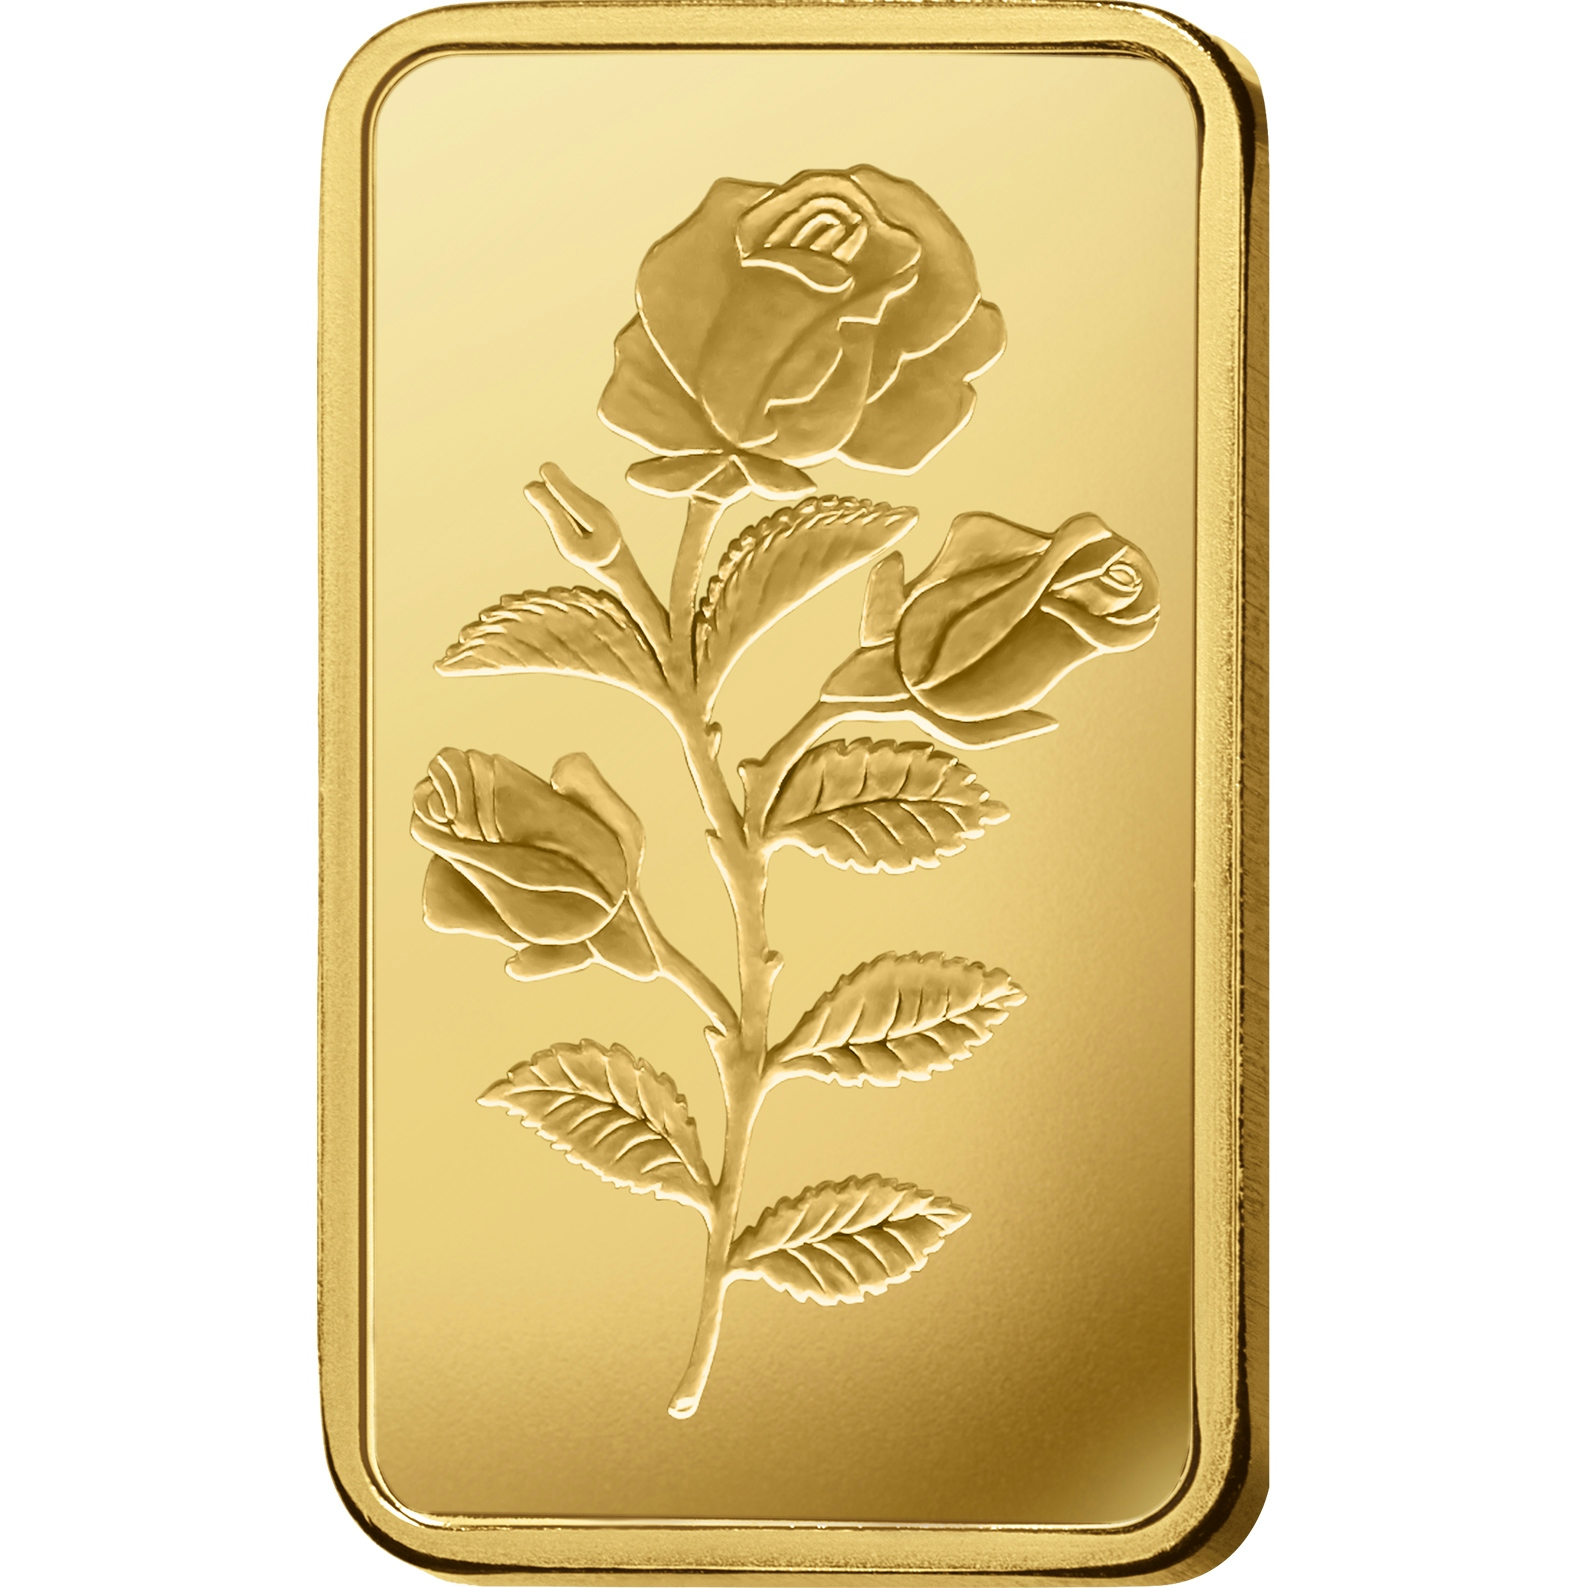 Achat d'or, 1 gram d'or pur Rosa - PAMP Suisse - Front 